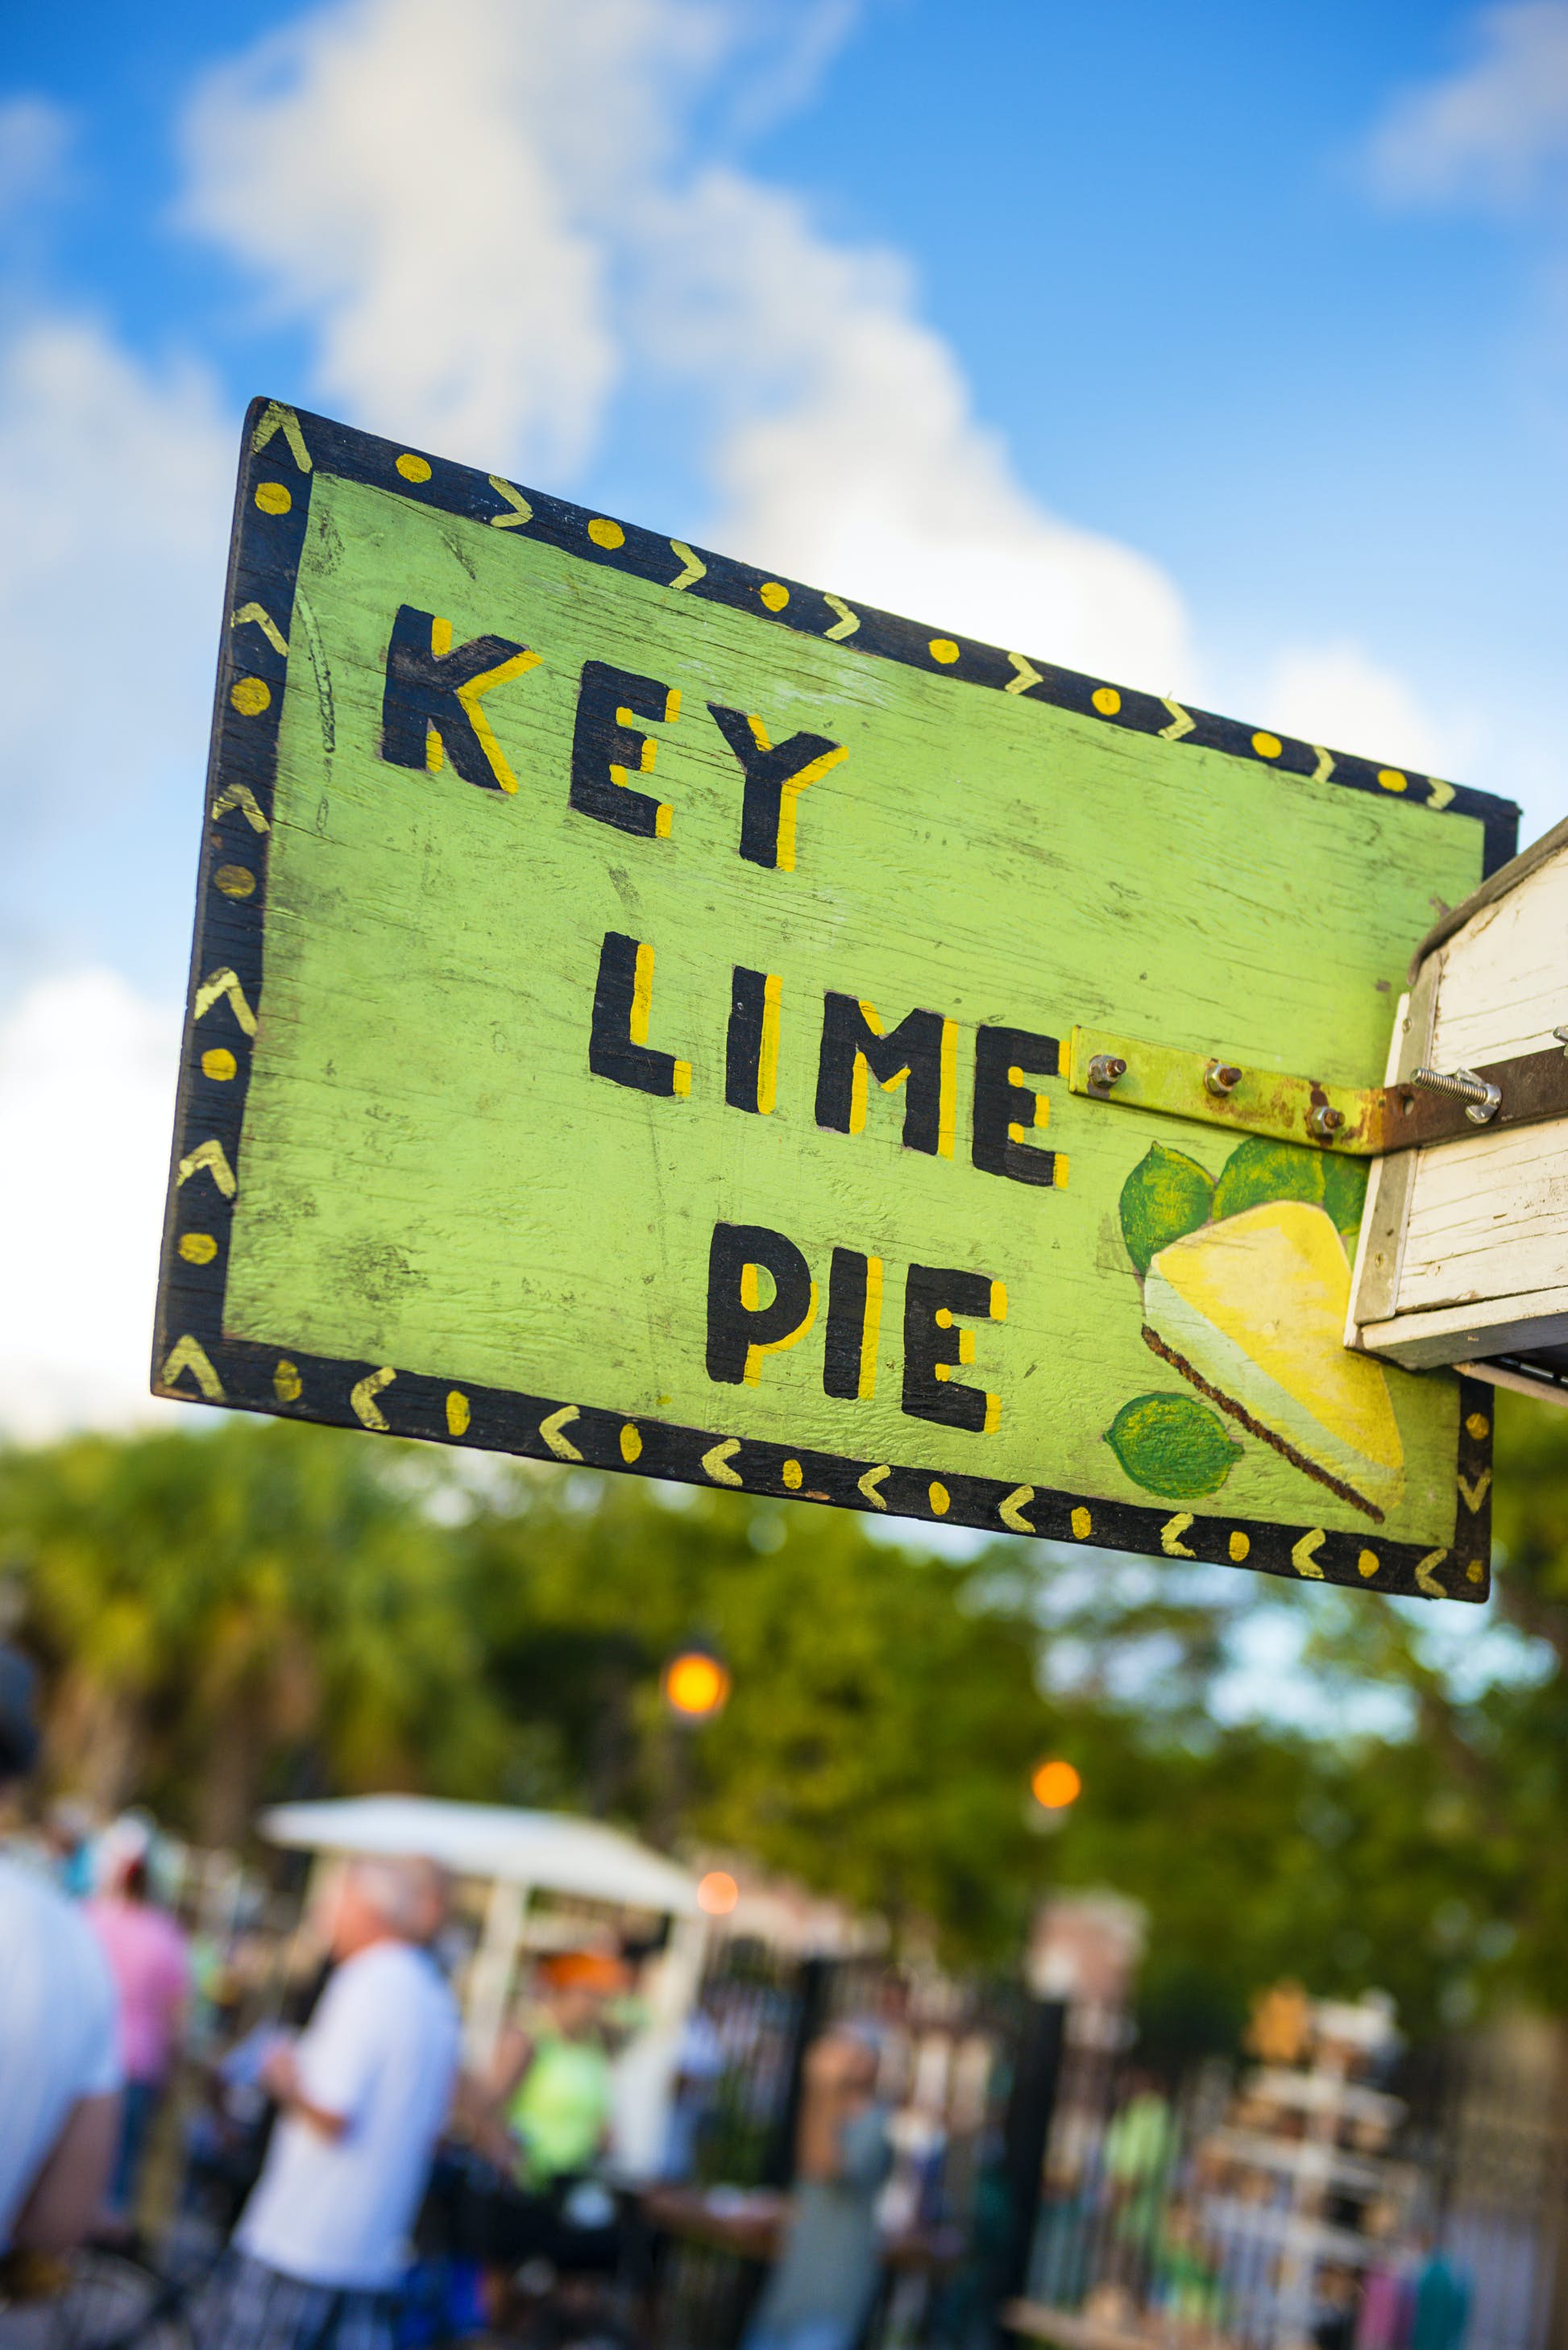 Many restaurants are open and the Key West speciality, key lime pie, is available © Justin Foulkes / Lonely Planet